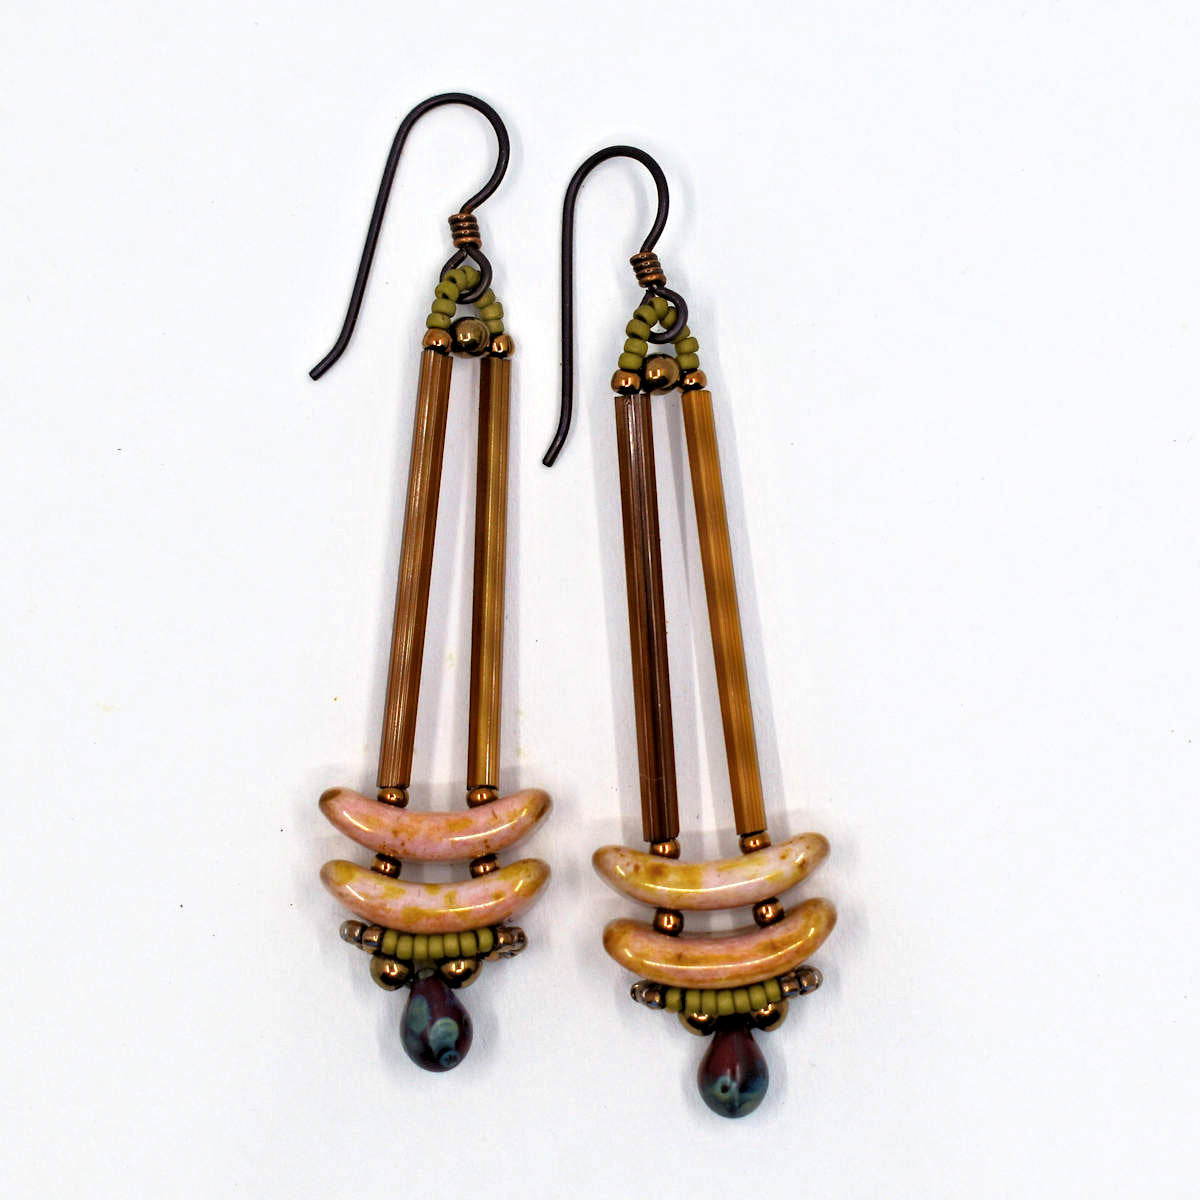 Earrings that look similar to a medicine dropper lay against a white background. There are two long, brown beads forming narrow vertical columns ending at the top of two speckled pink stacked arc shaped beads. At the bottom is a speckled red drop shaped bead, surrounded by a belt of gold seed beads.